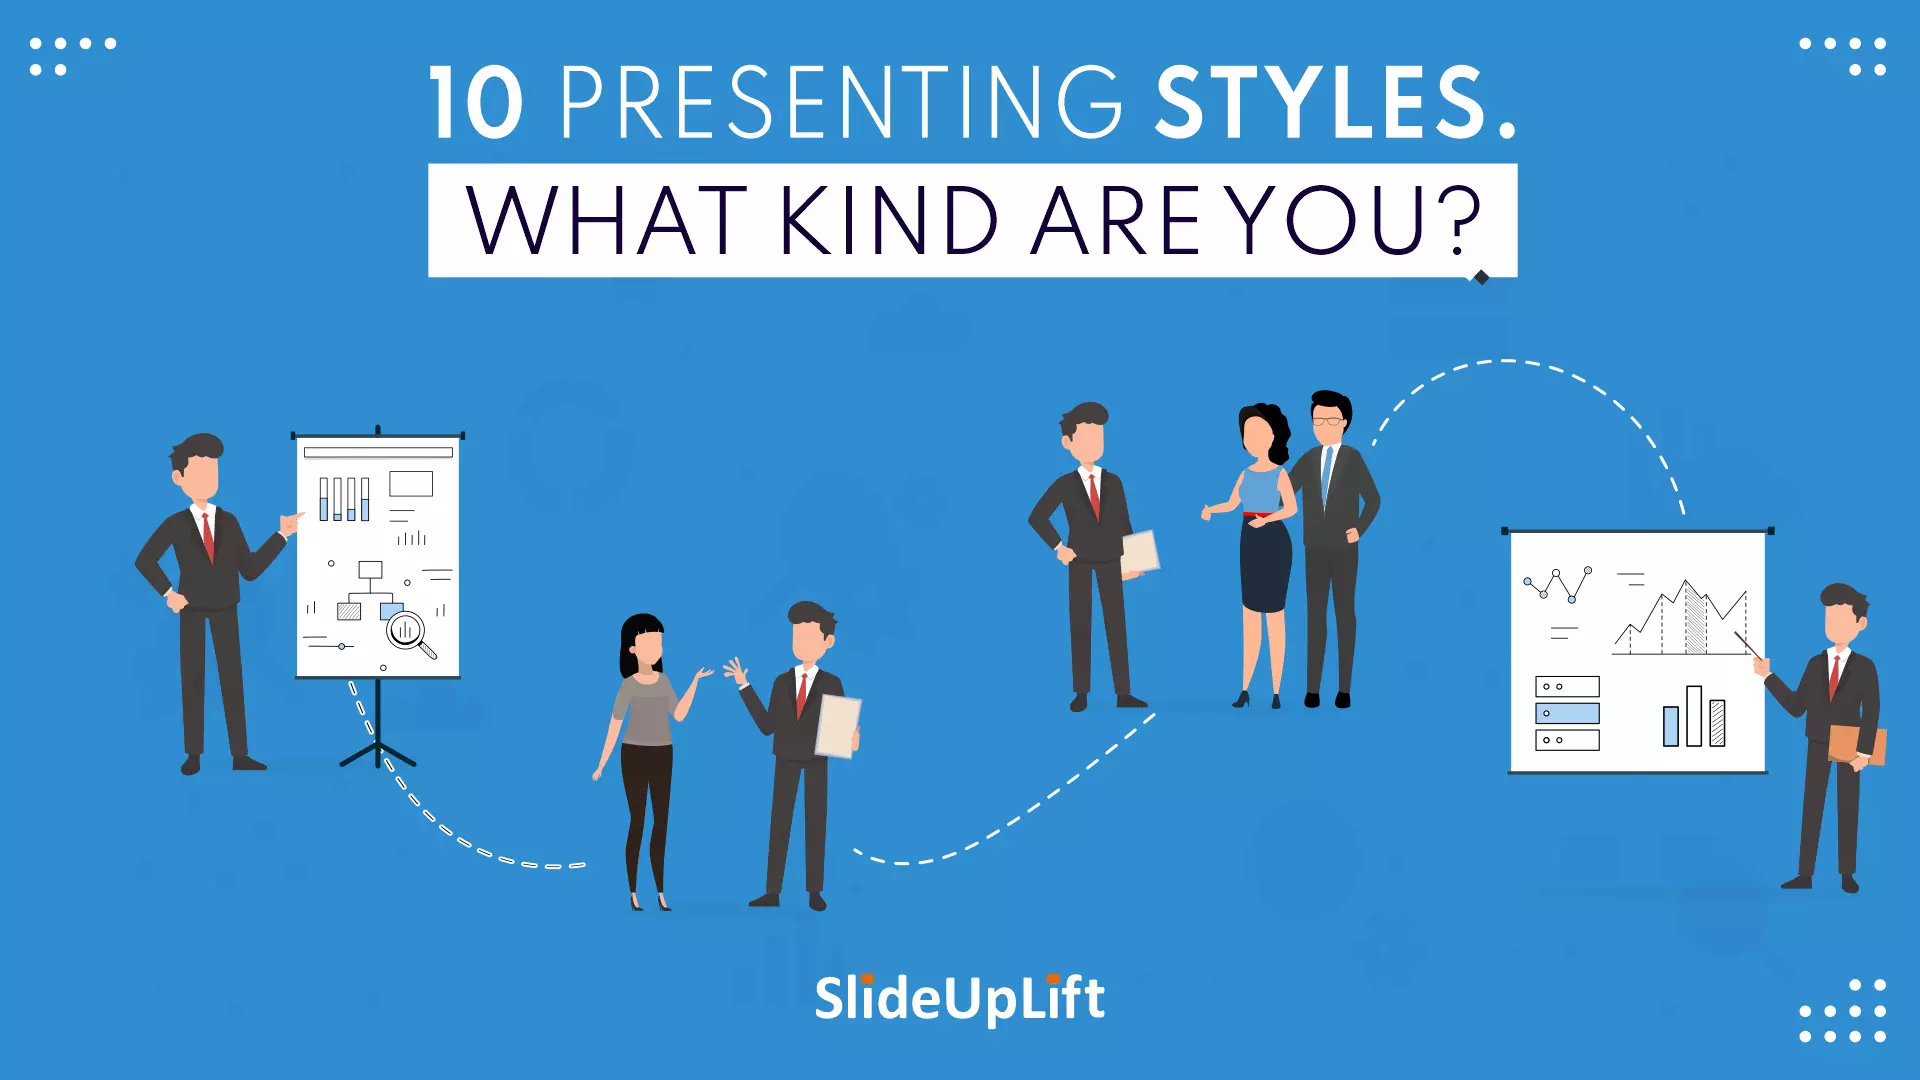 Ten Presenting Styles : What Kind Are You?